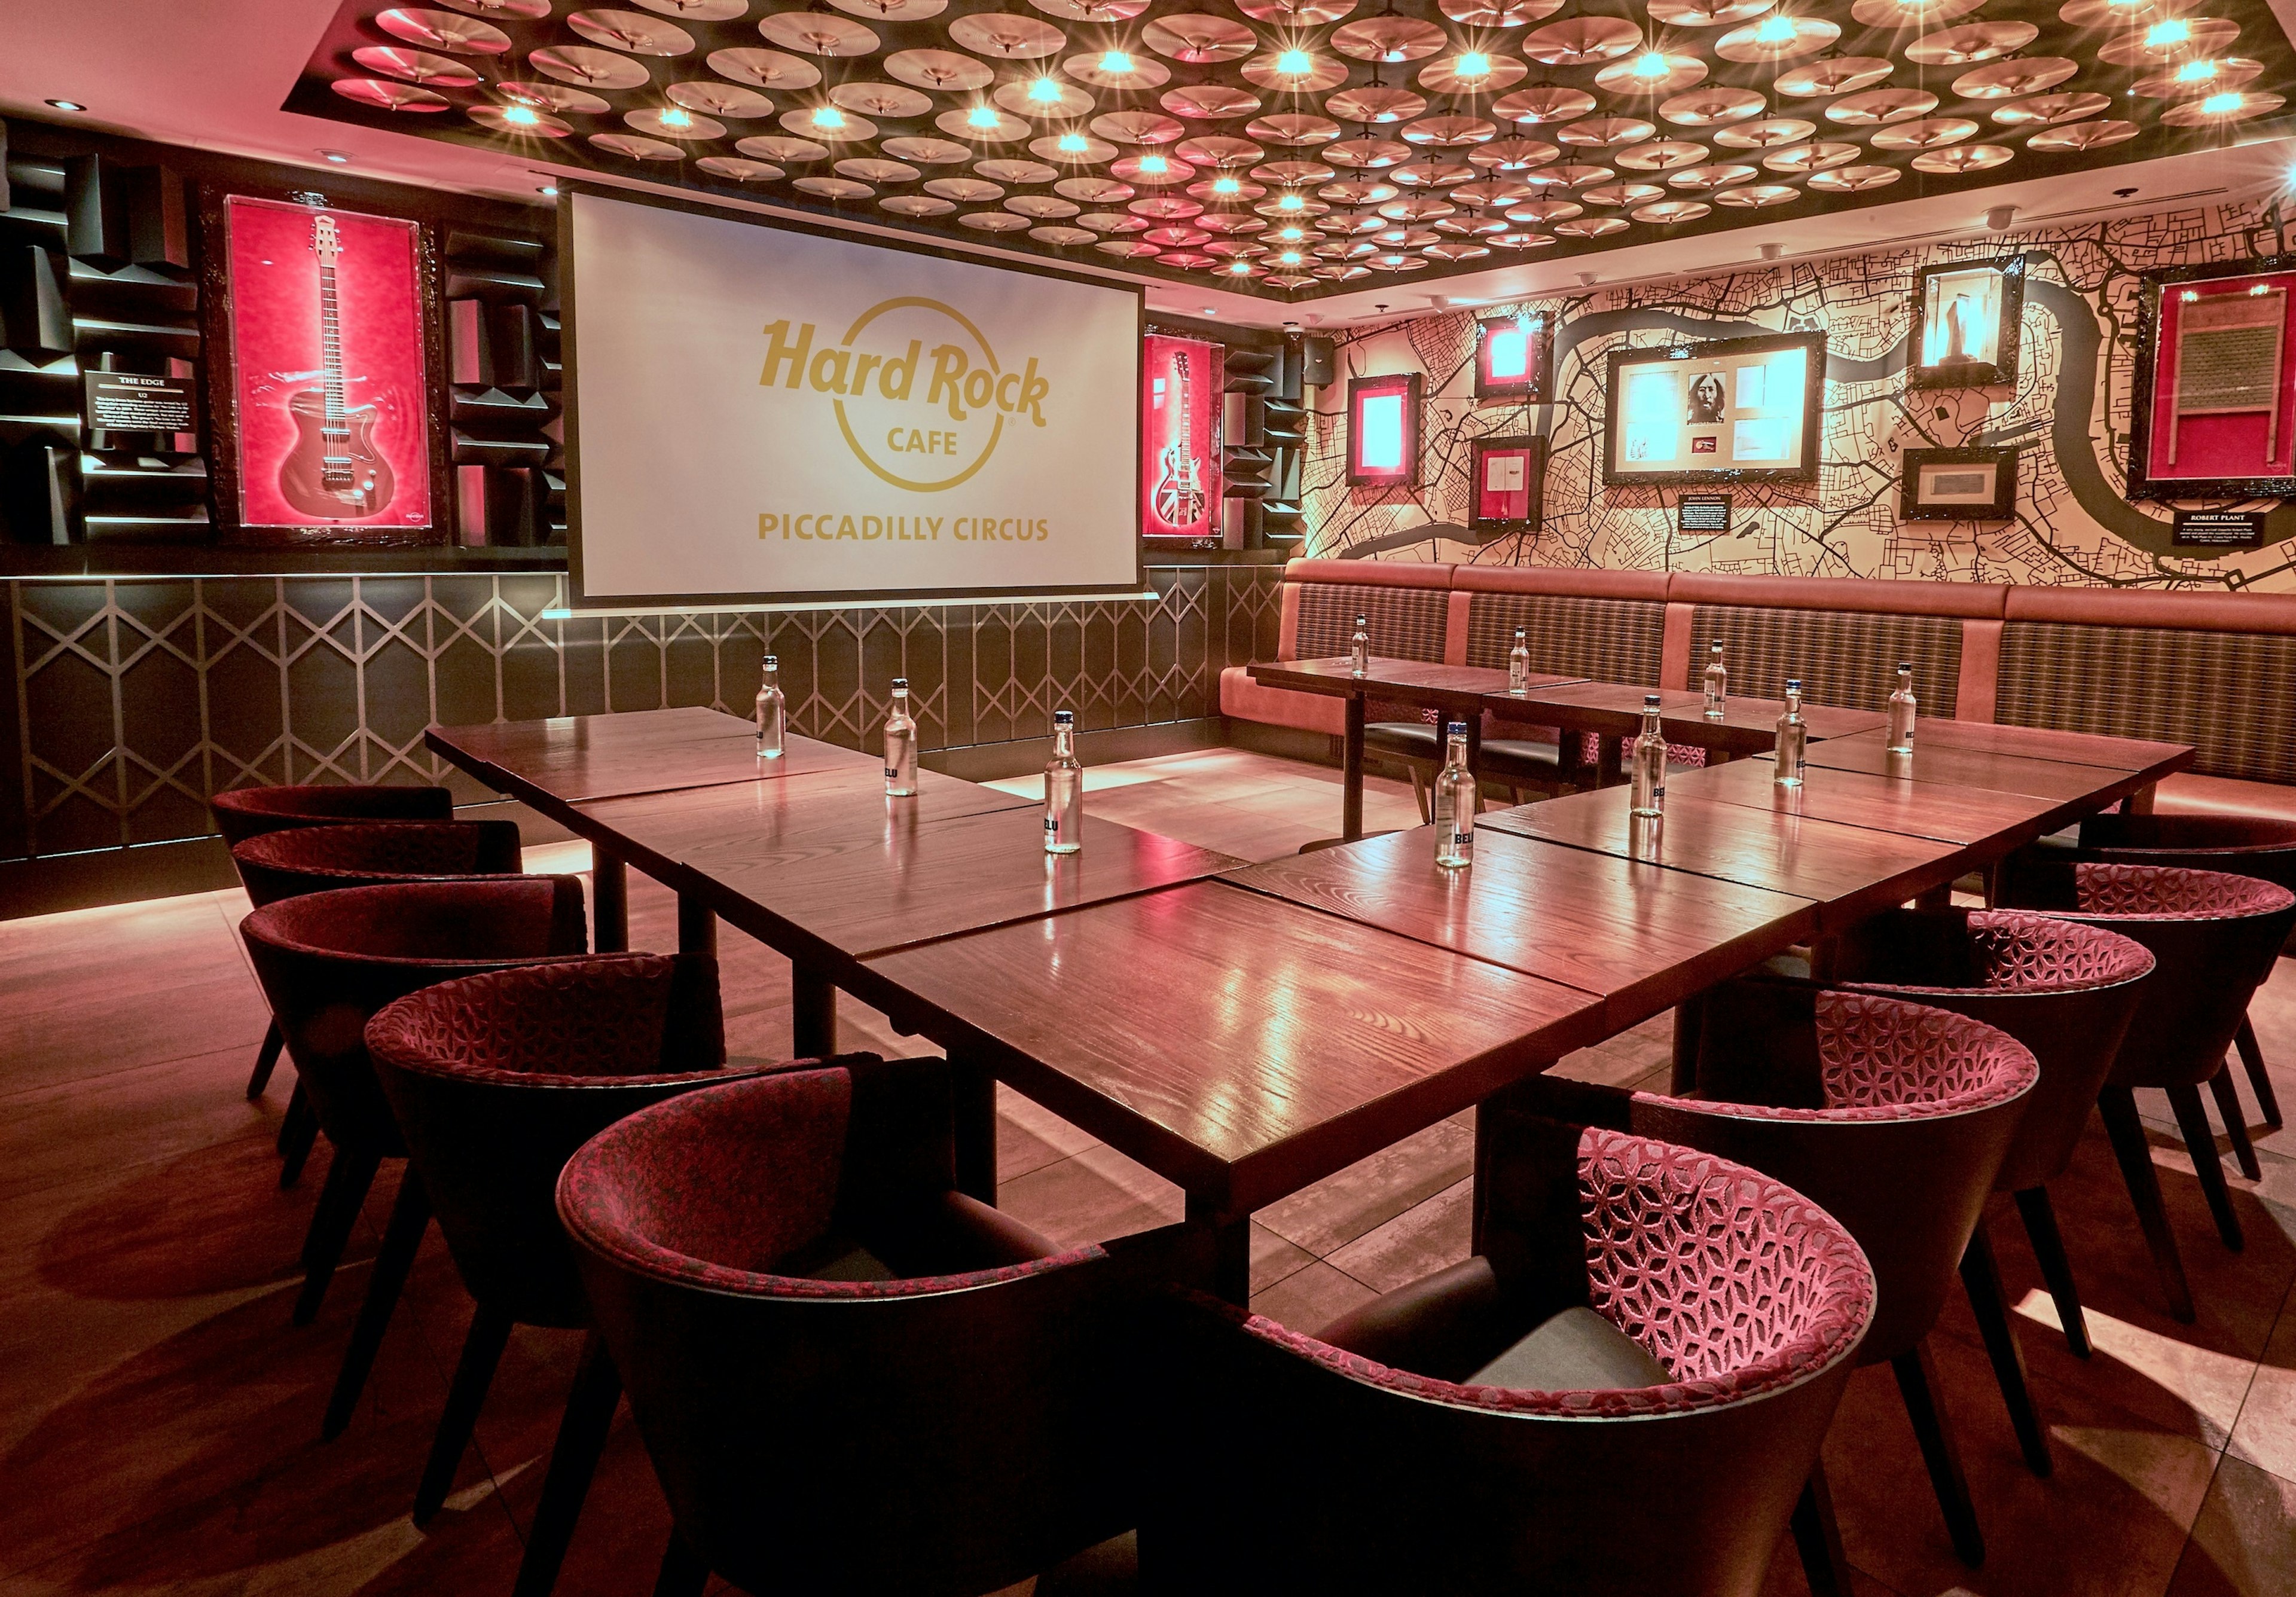 Business - Hard Rock Cafe Piccadilly Circus